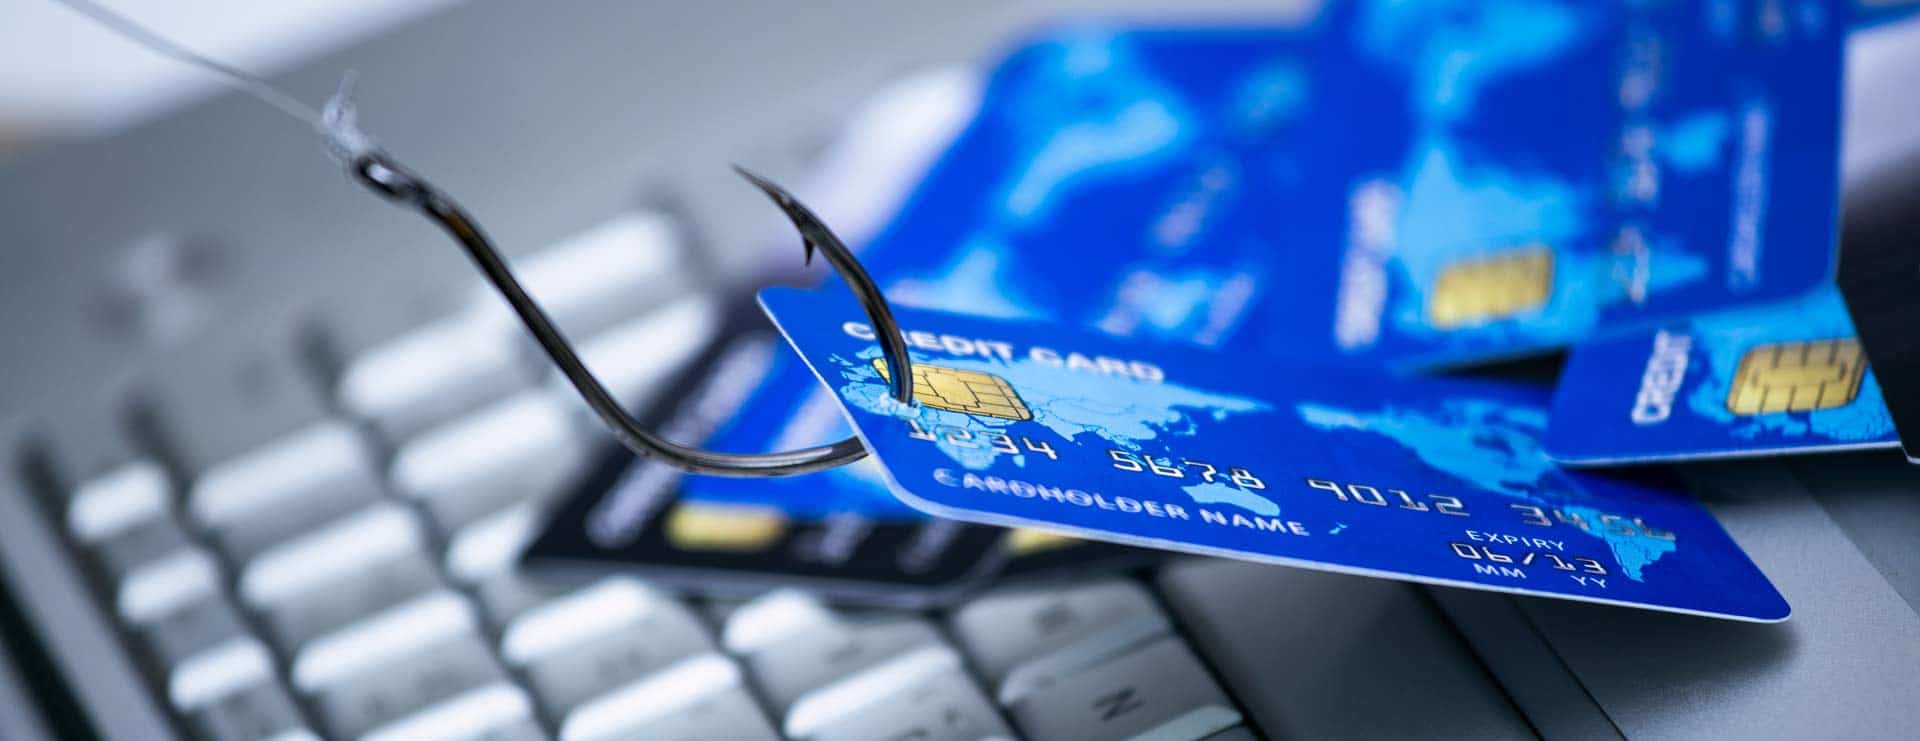 Blue bank card hooked by credit card fraud